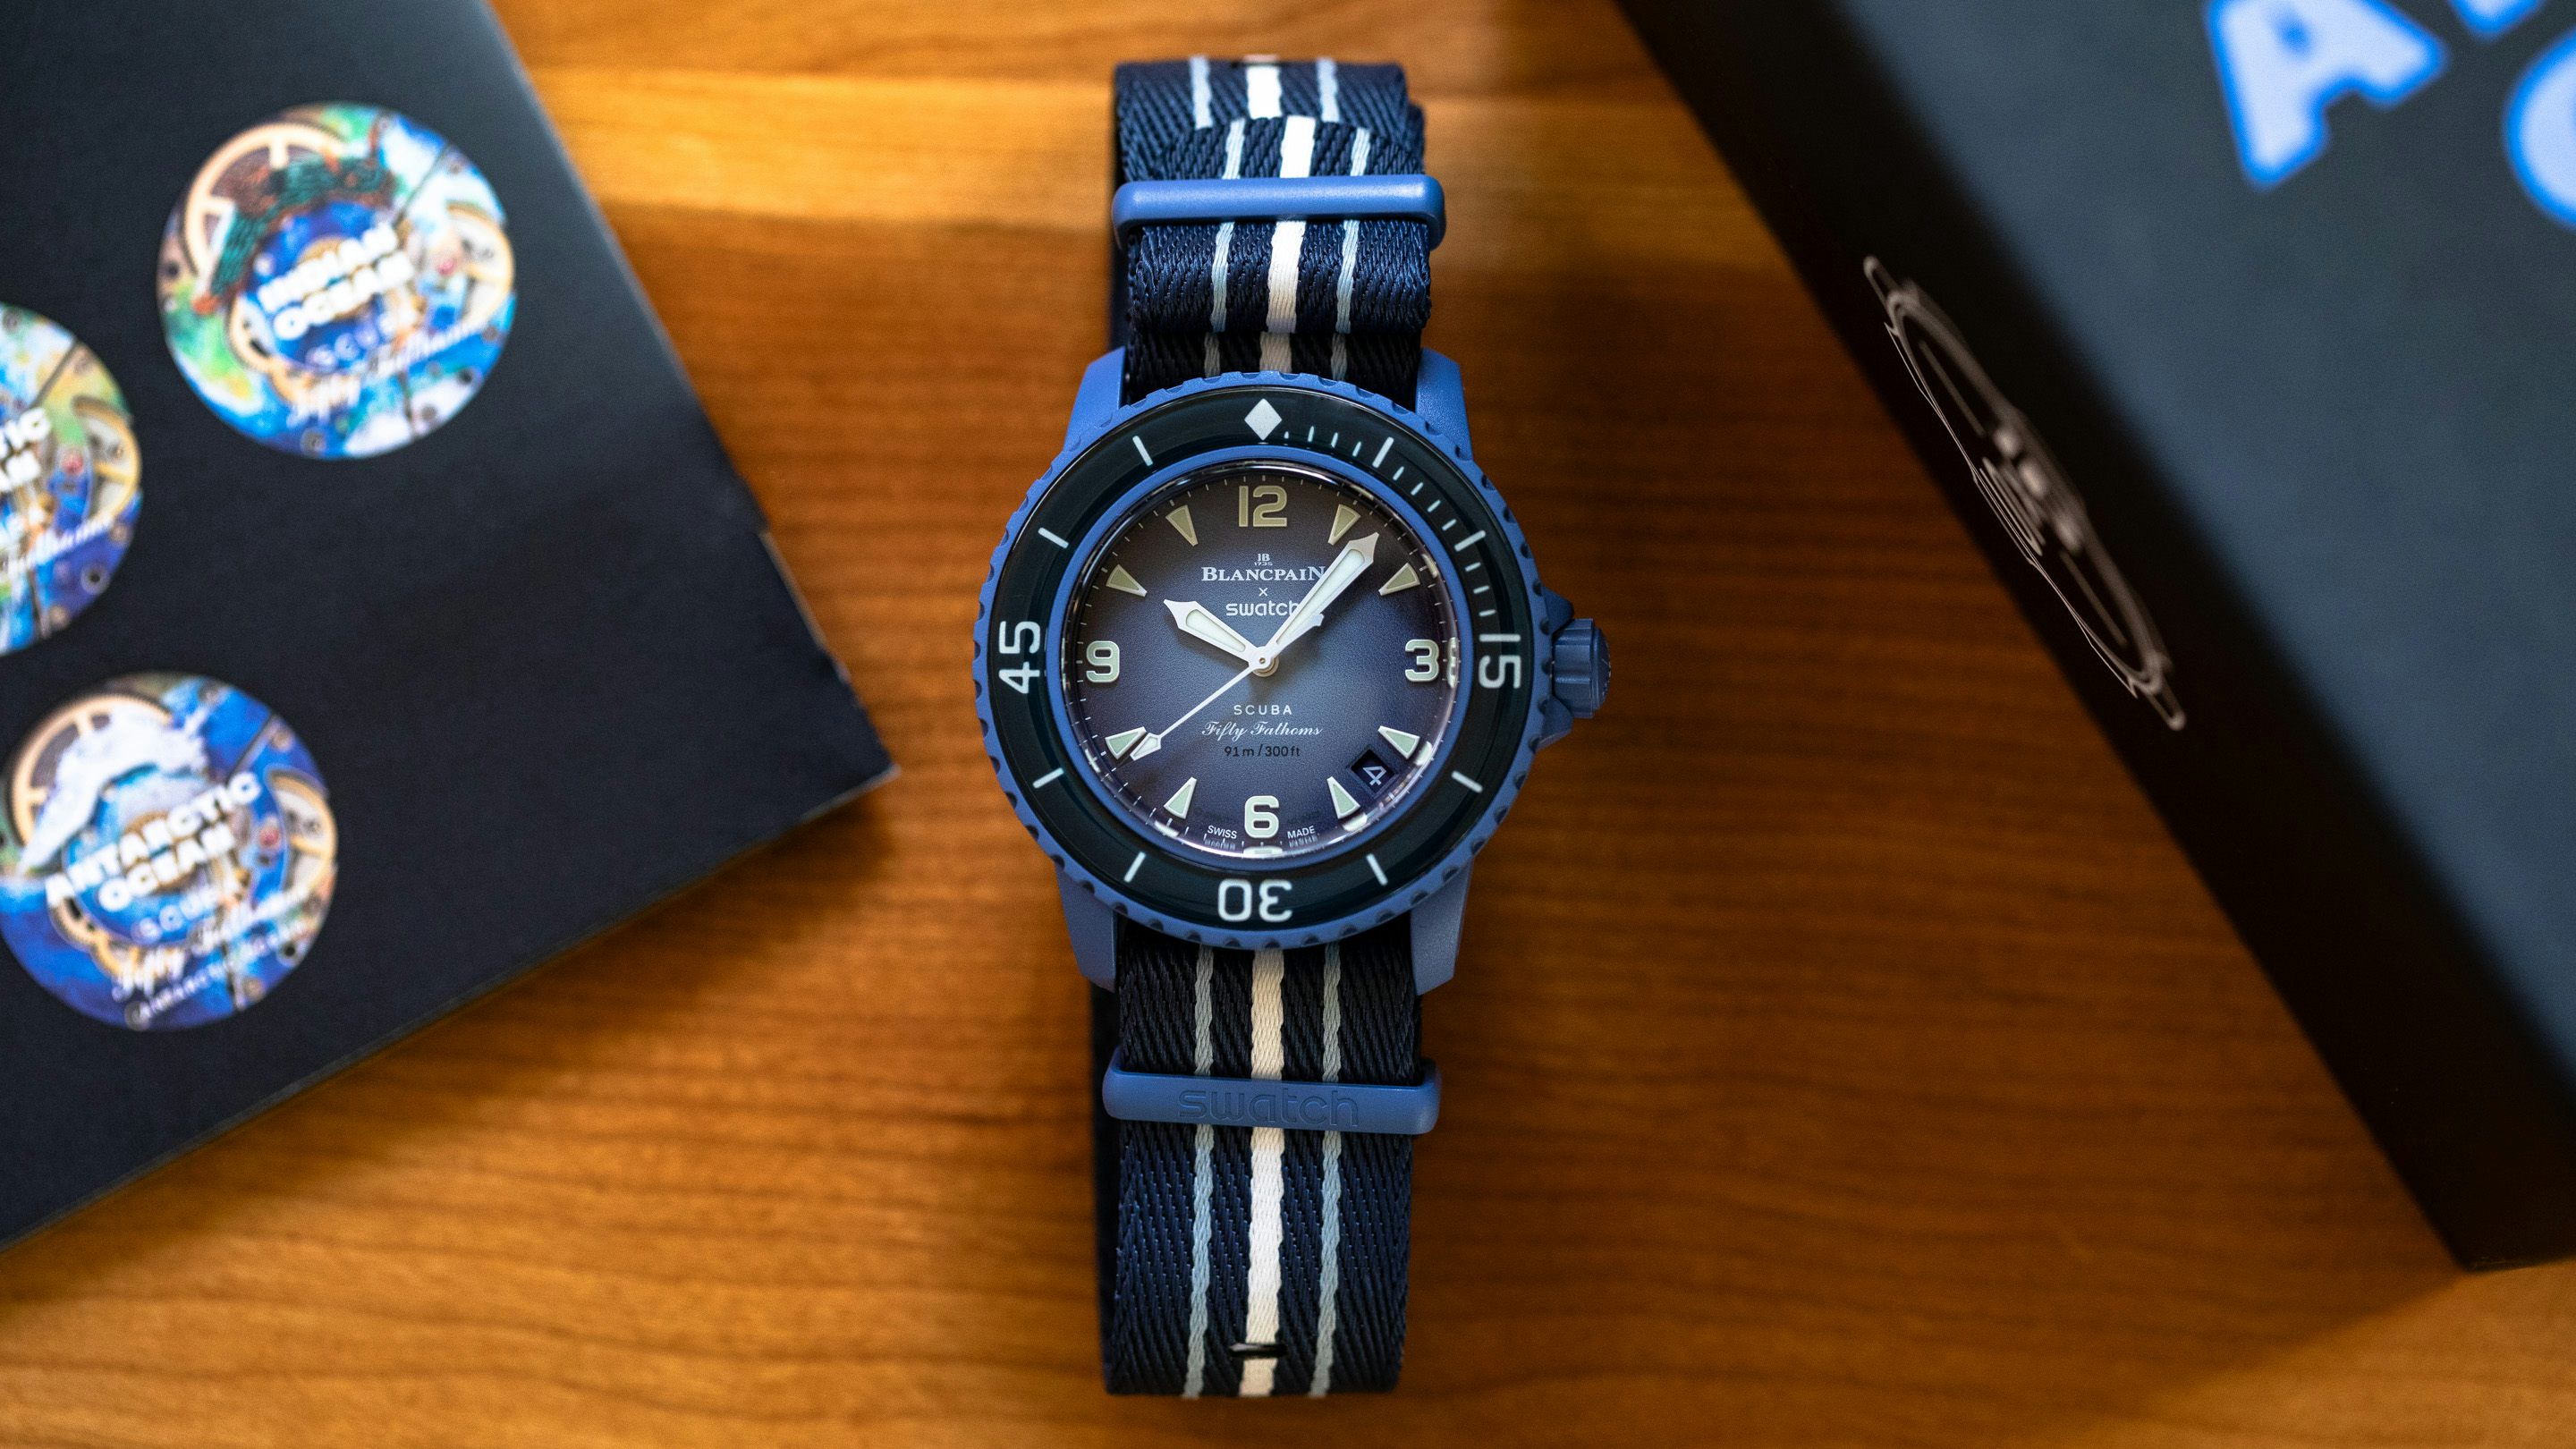 Introducing: The Swatch X Blancpain Scuba Fifty Fathoms Is Real – And It Has Arrived (Video + Live Pics) - Figure 2